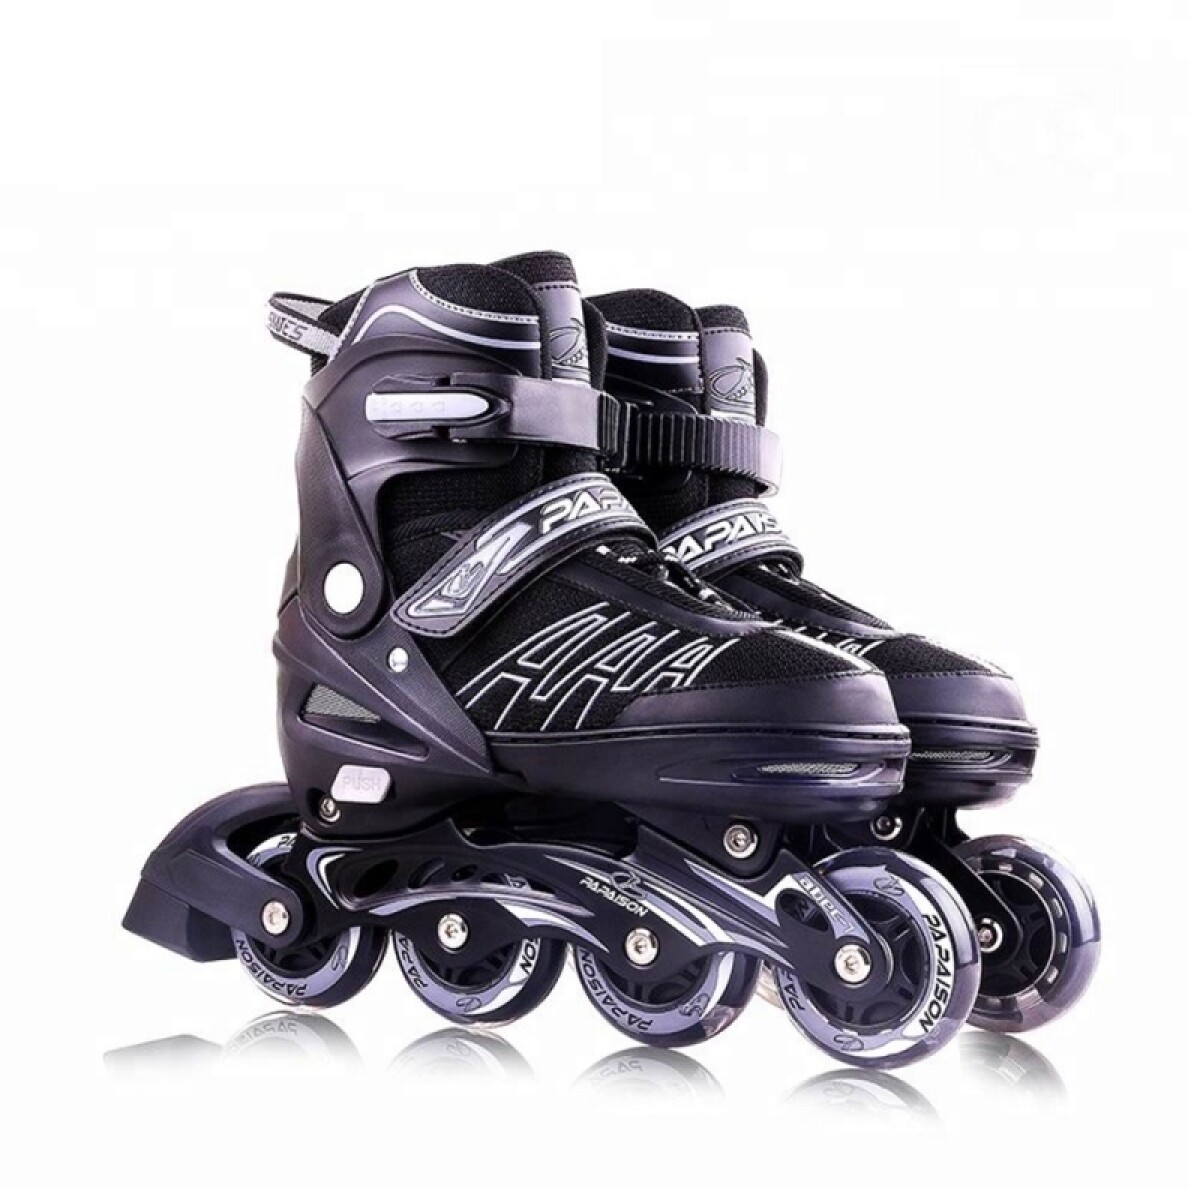 Roller Patines 4 Ruedas Lineal Papaison Regulables Negros - Talle M (34 Al 37) 